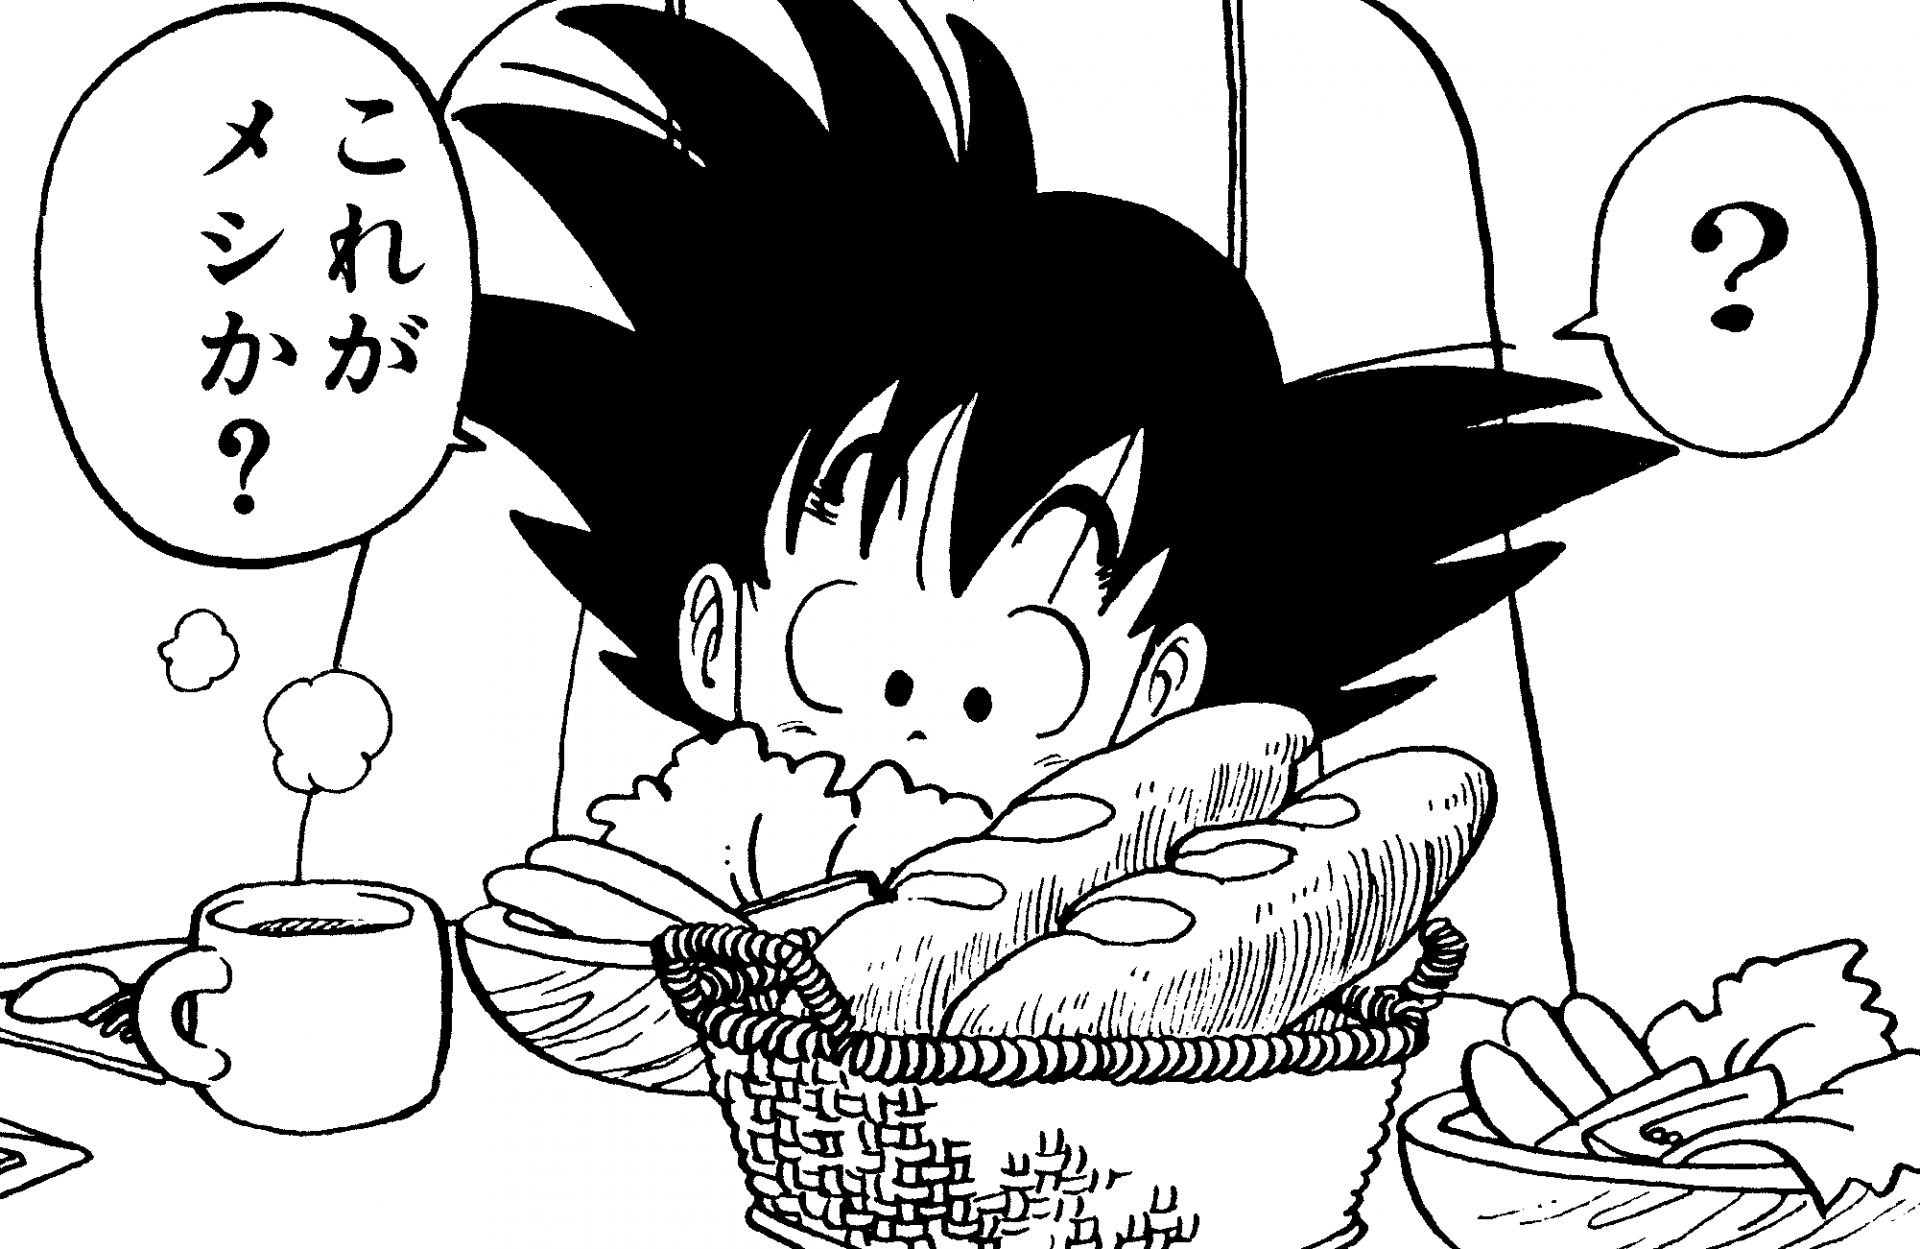 Dining in Dragon Ball～ Real-World Food Arc] | DRAGON BALL OFFICIAL SITE